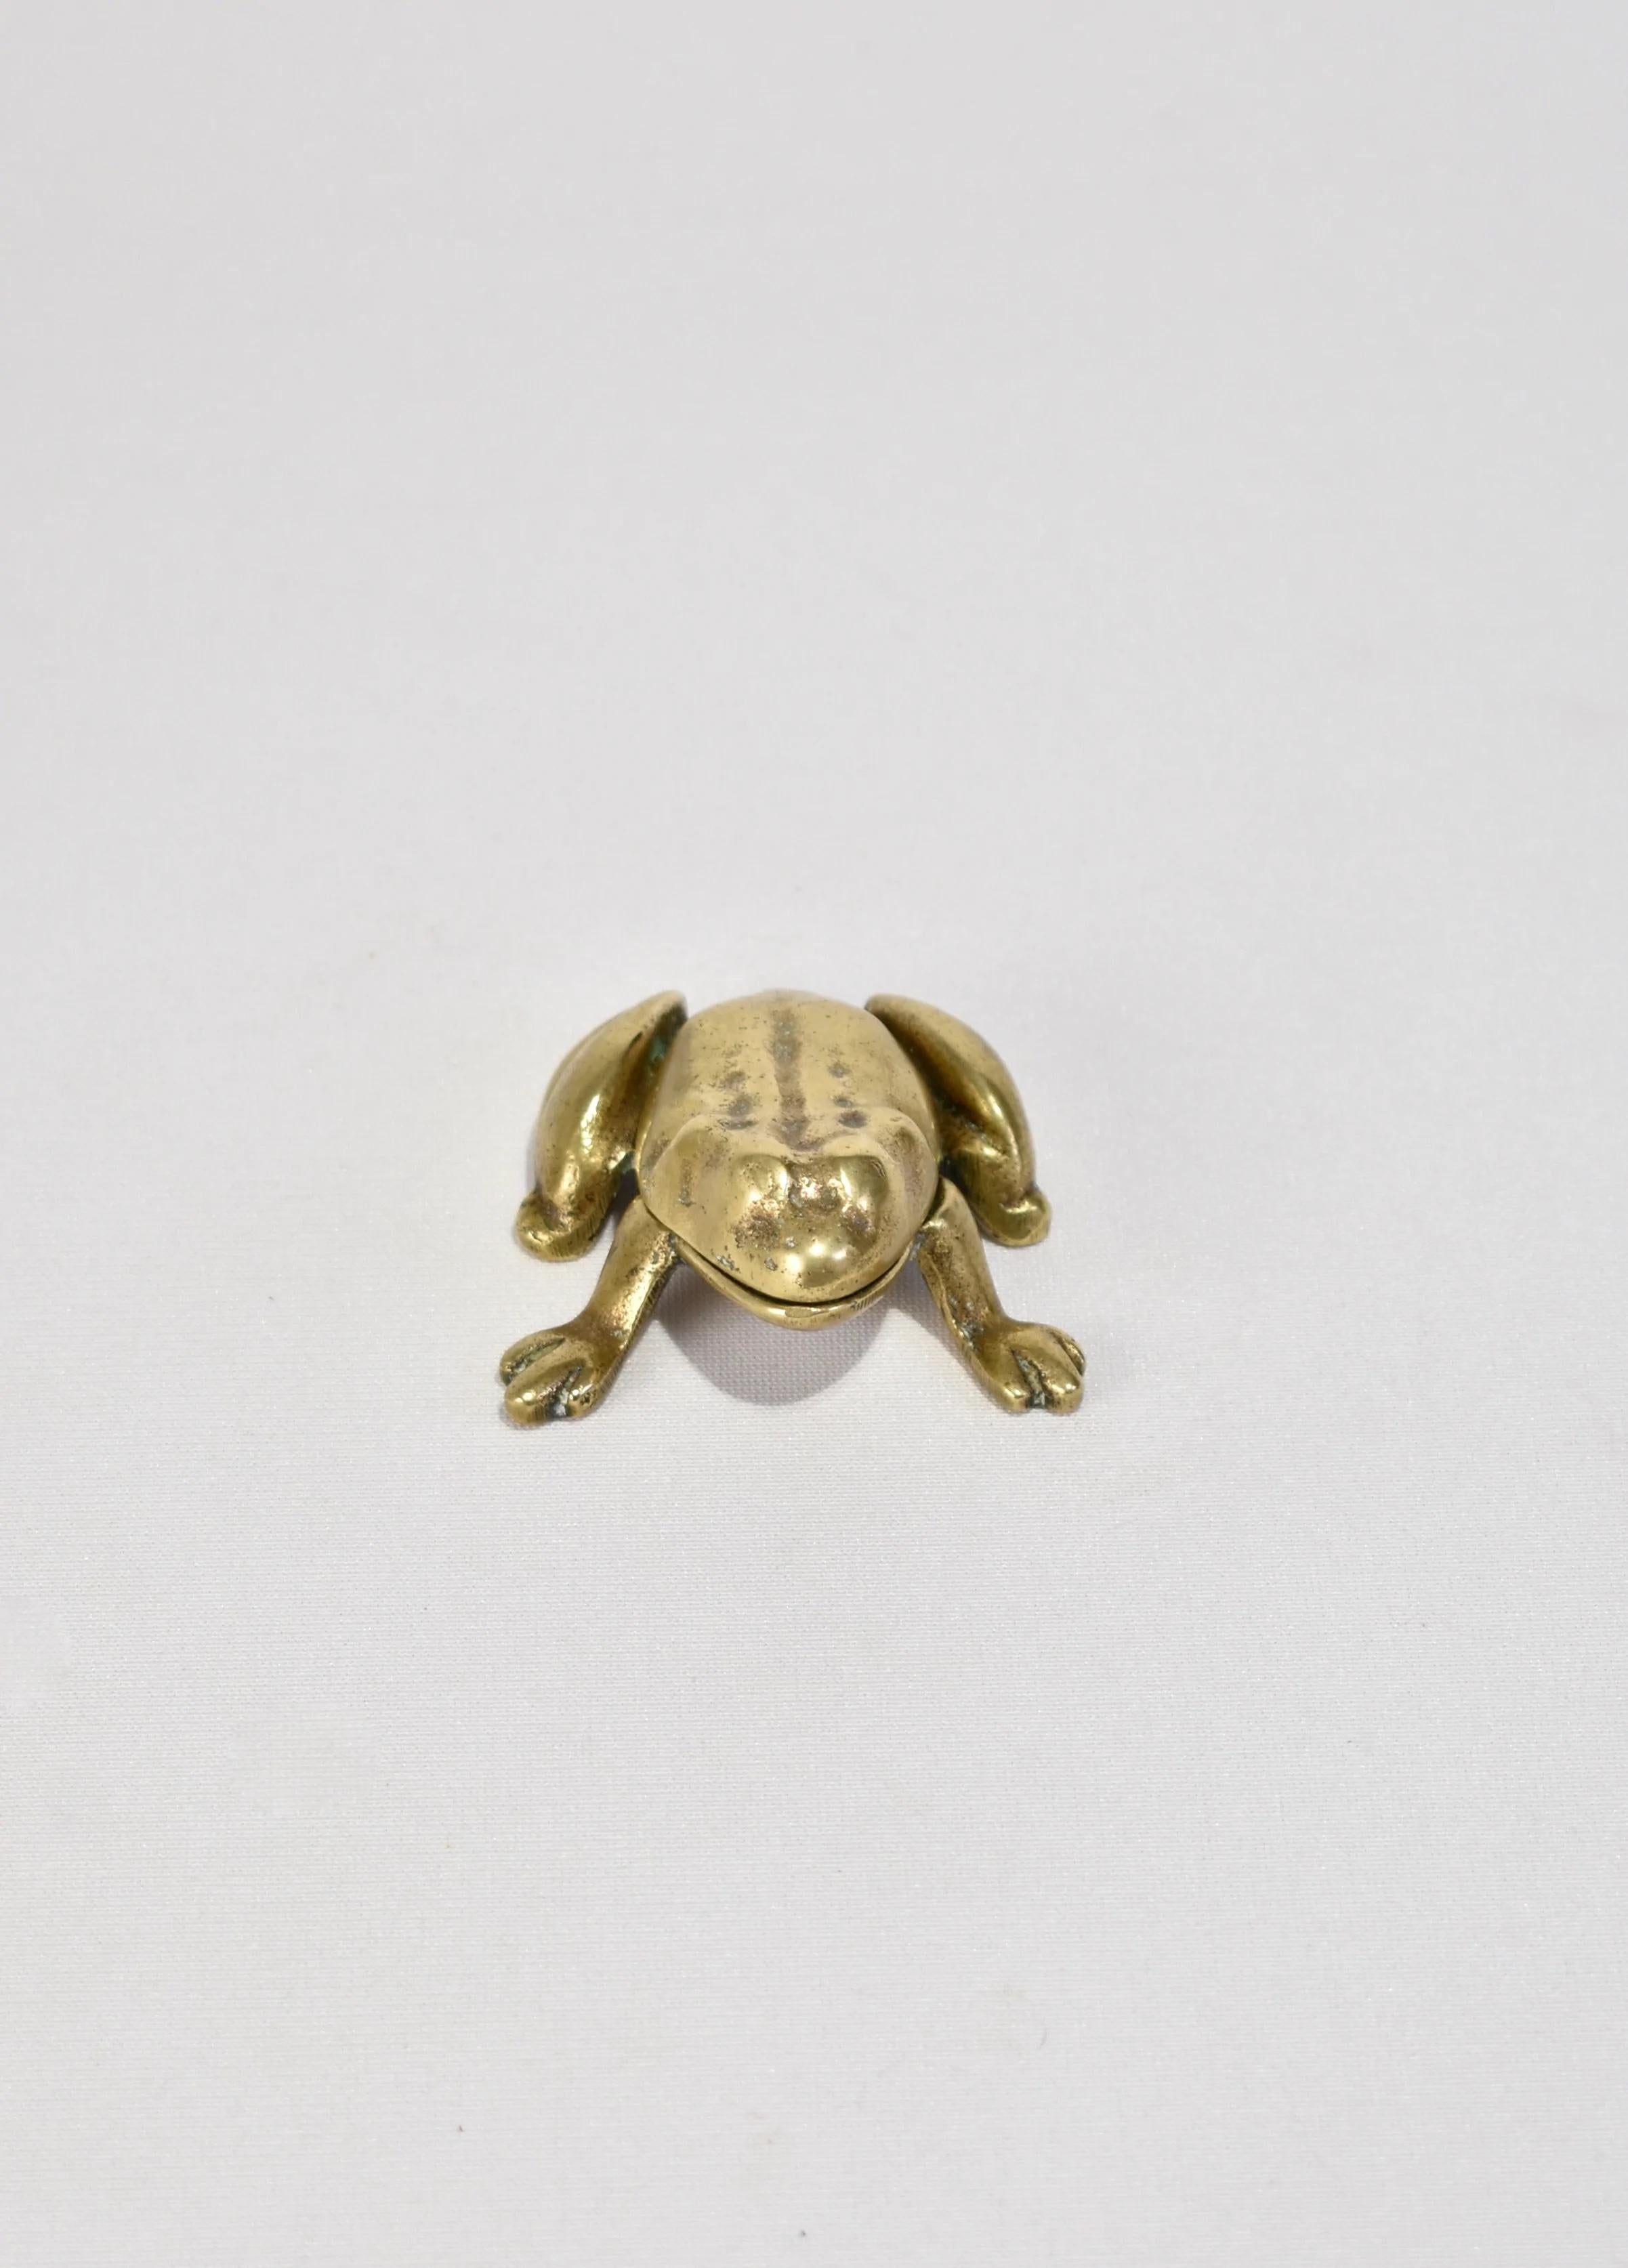 Vintage brass trinket box in the shape of a frog.